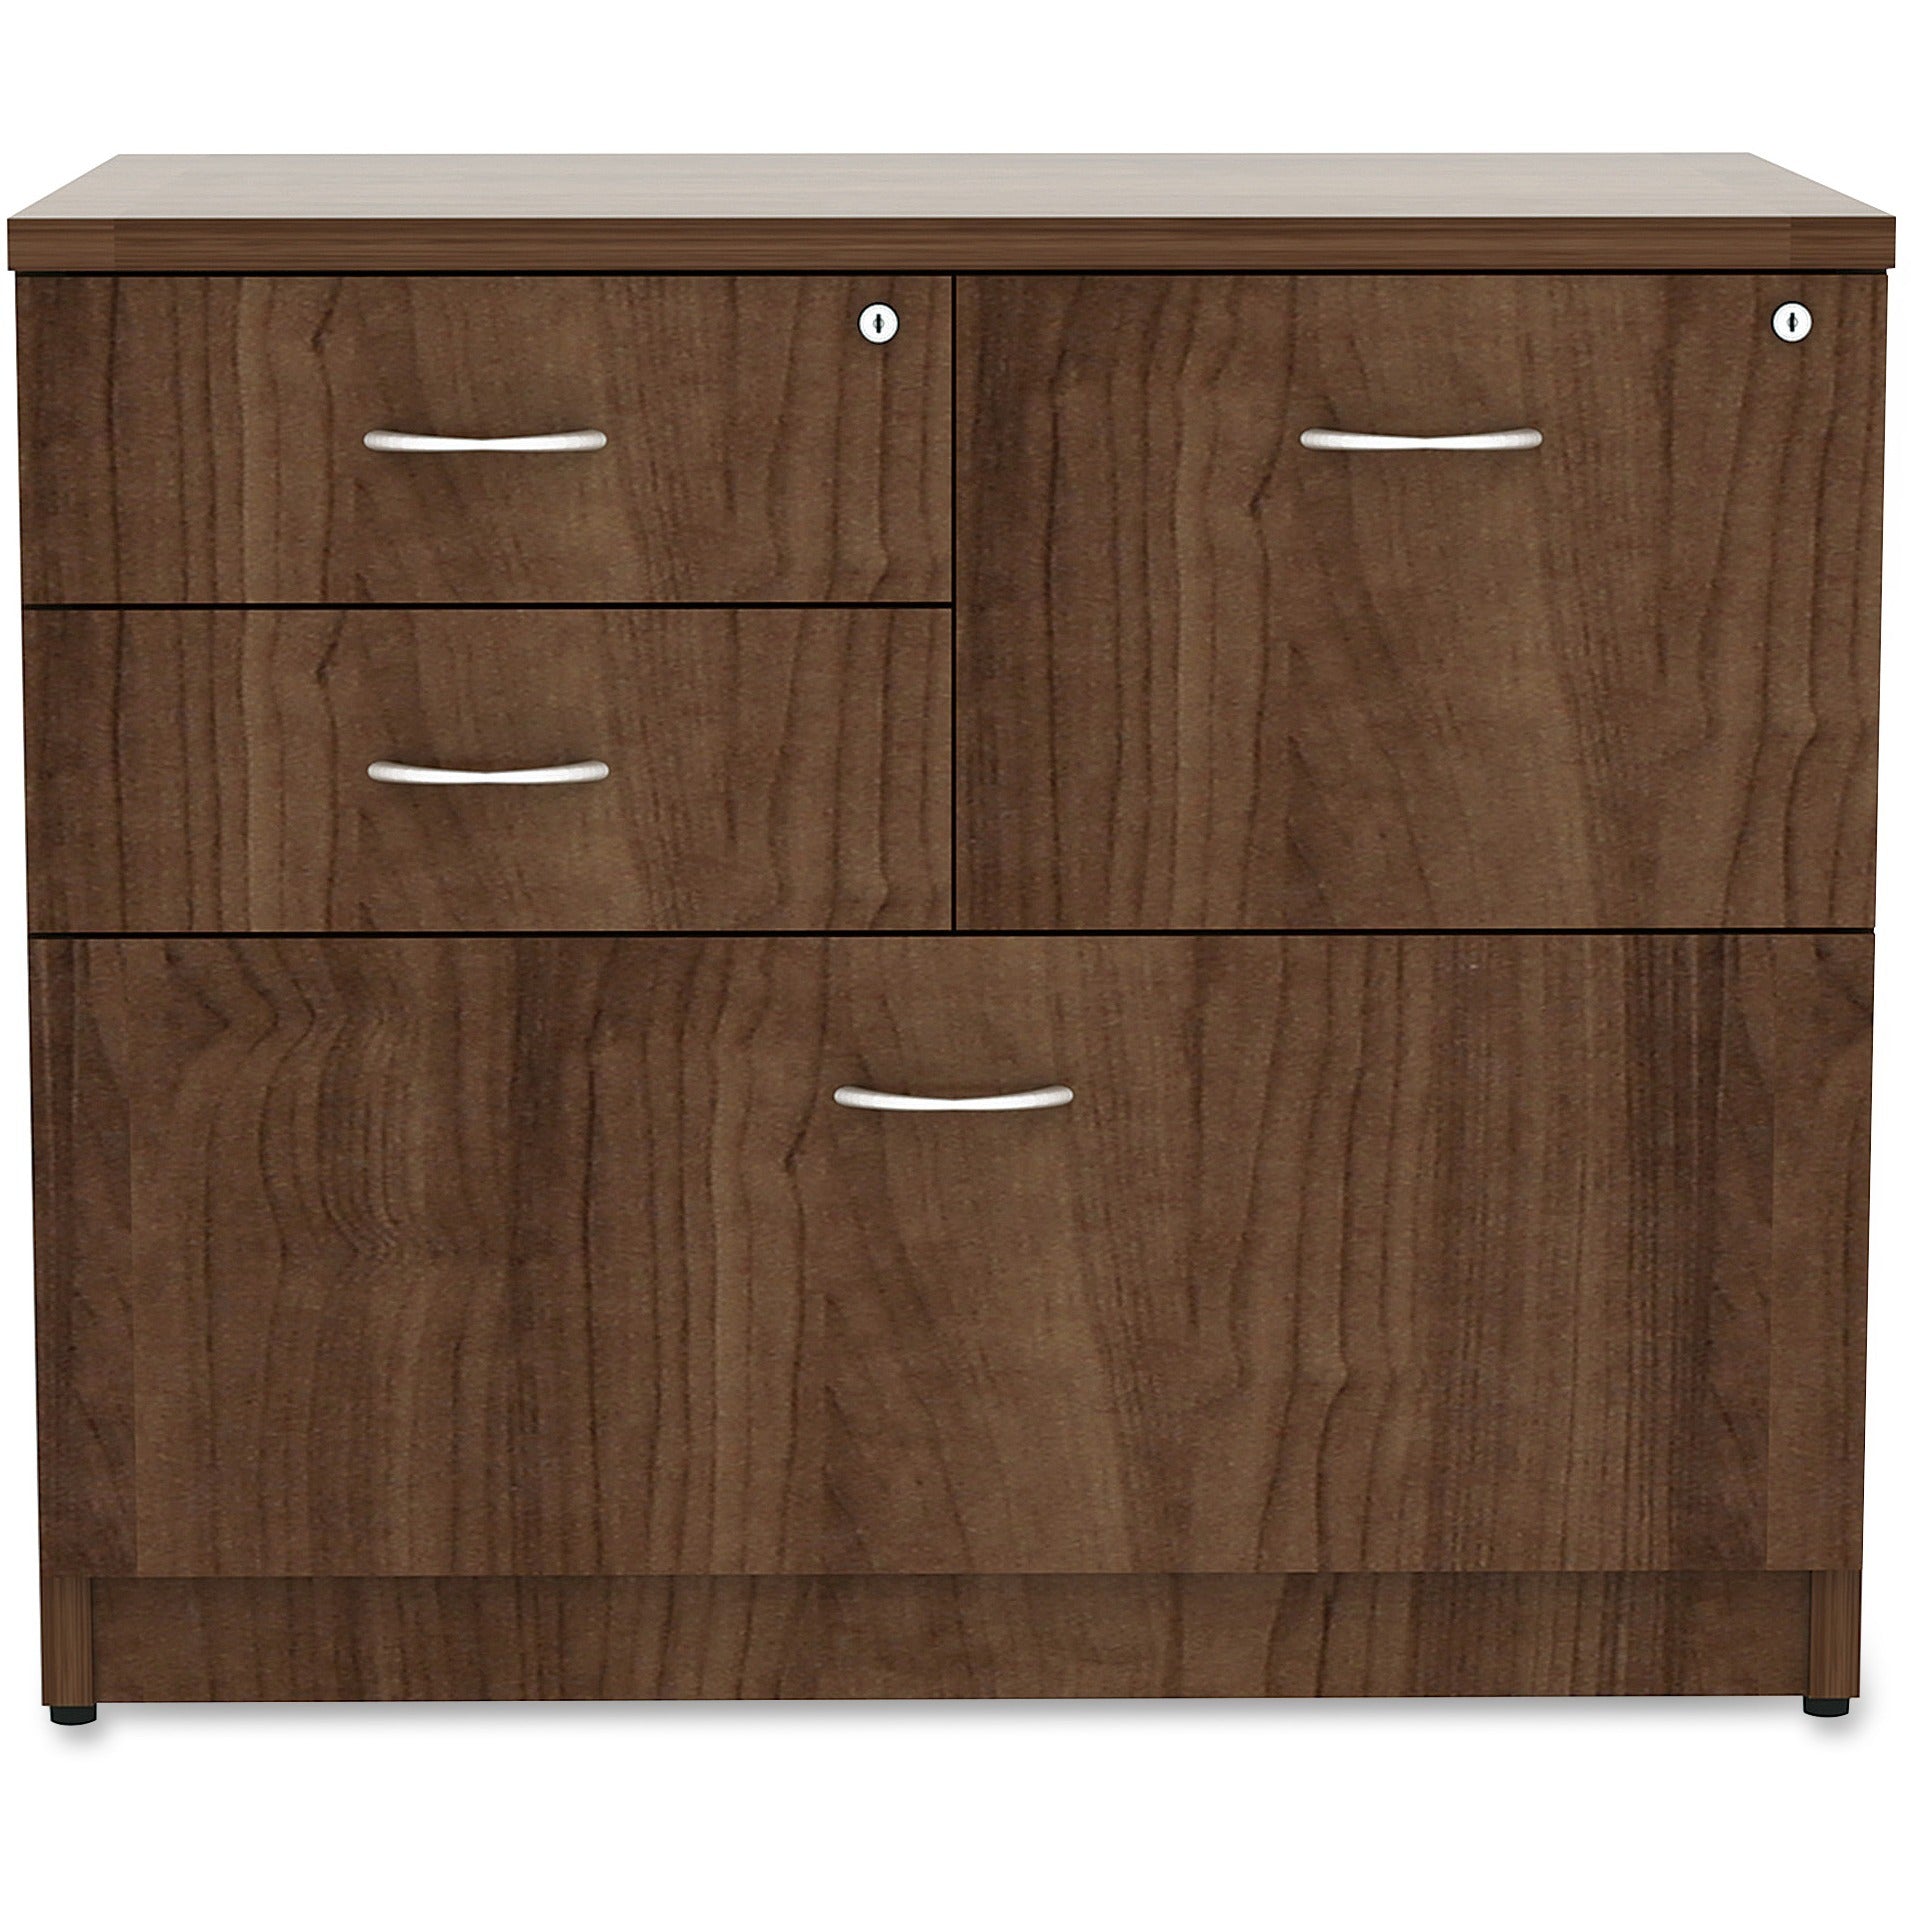 lorell-essentials-series-box-box-file-lateral-file-1-side-panel-01-edge-355-x-22295-lateral-file-4-x-box-file-drawers-walnut-laminate-table-top-versatile-ball-bearing-glide-drawer-extension-security-lock-durable-adjustable-l_llr69542 - 2